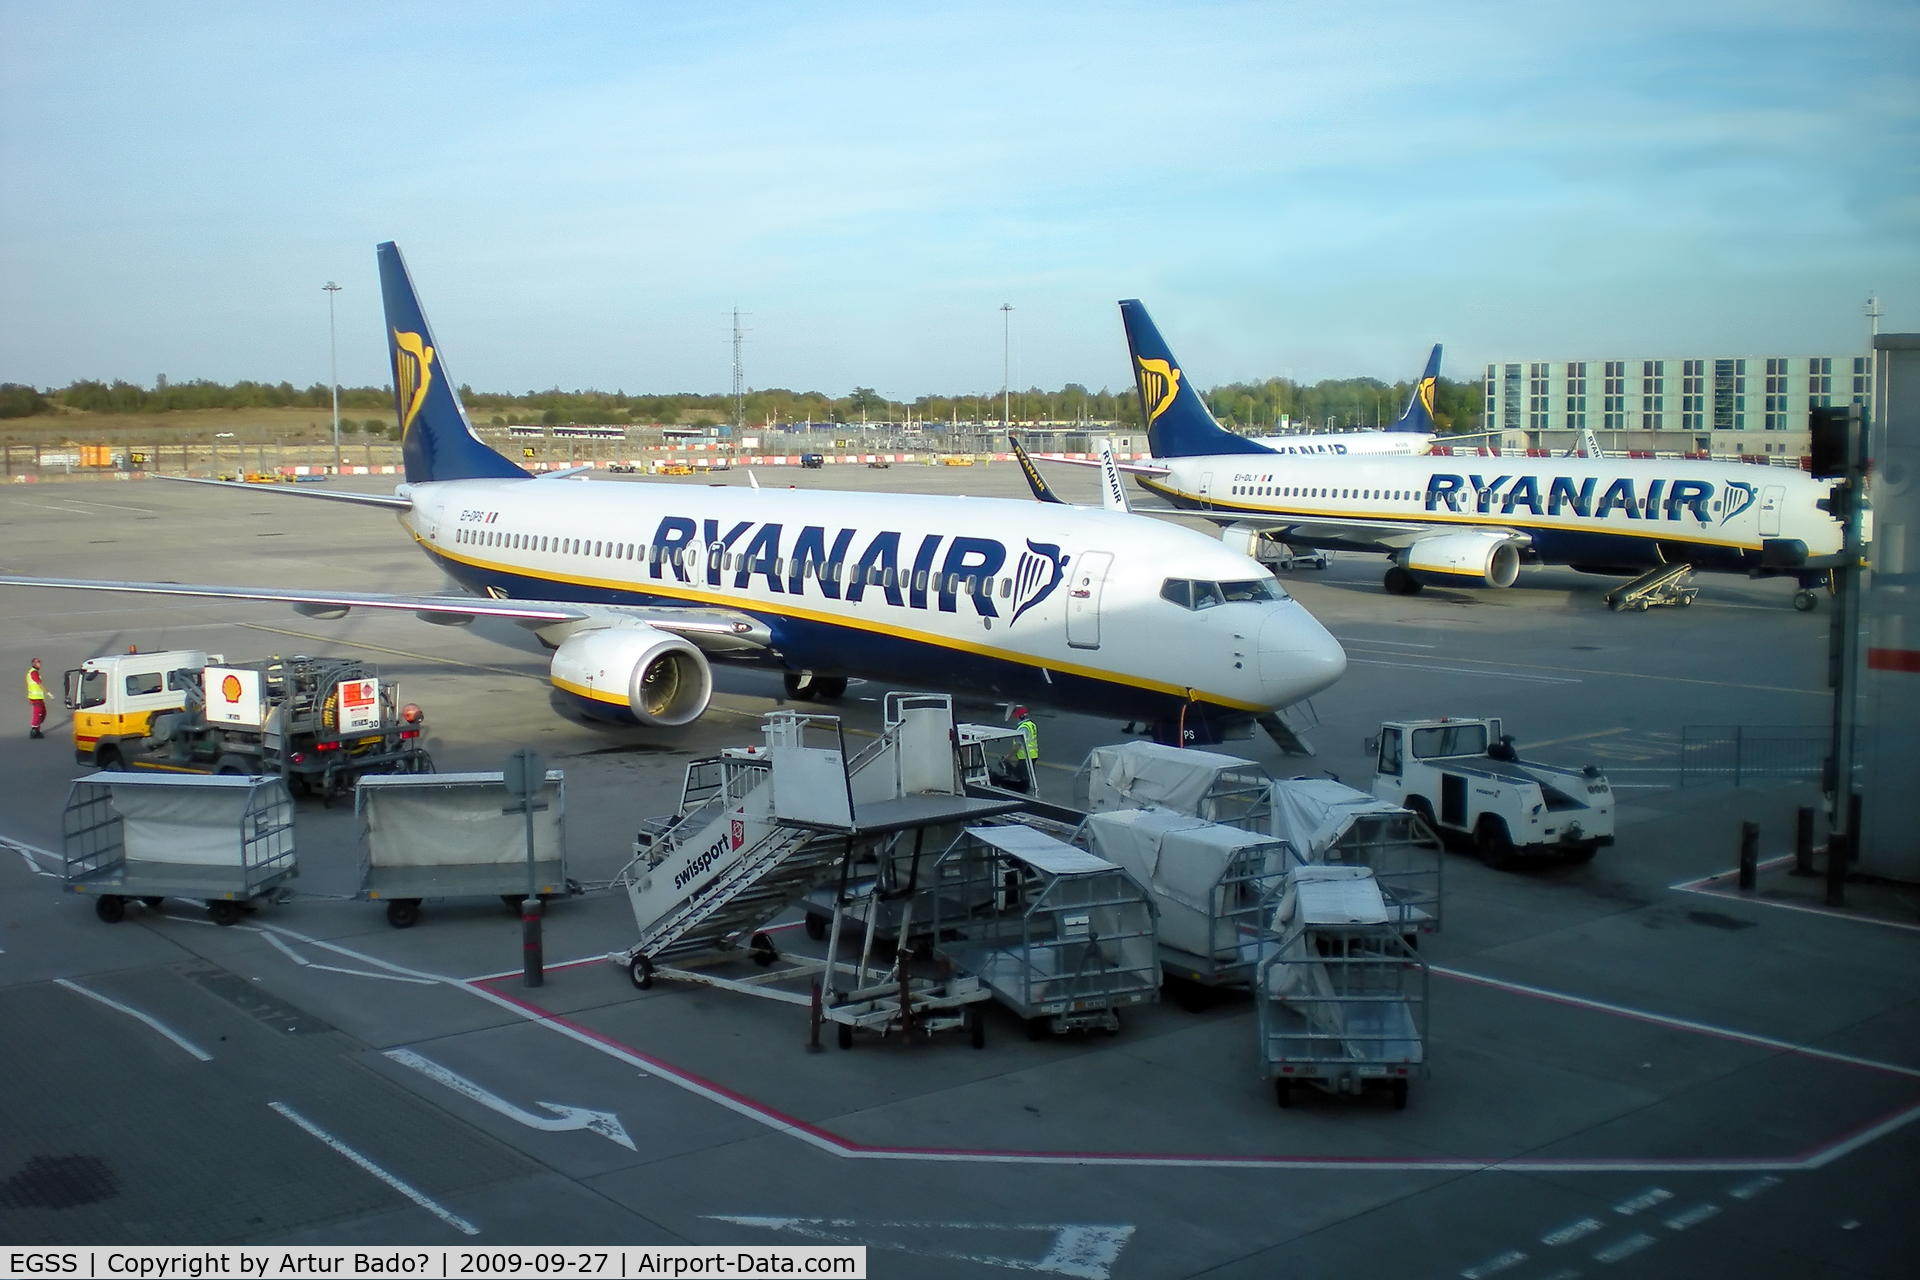 London Stansted Airport, London, England United Kingdom (EGSS) - London Stansted - EGSS